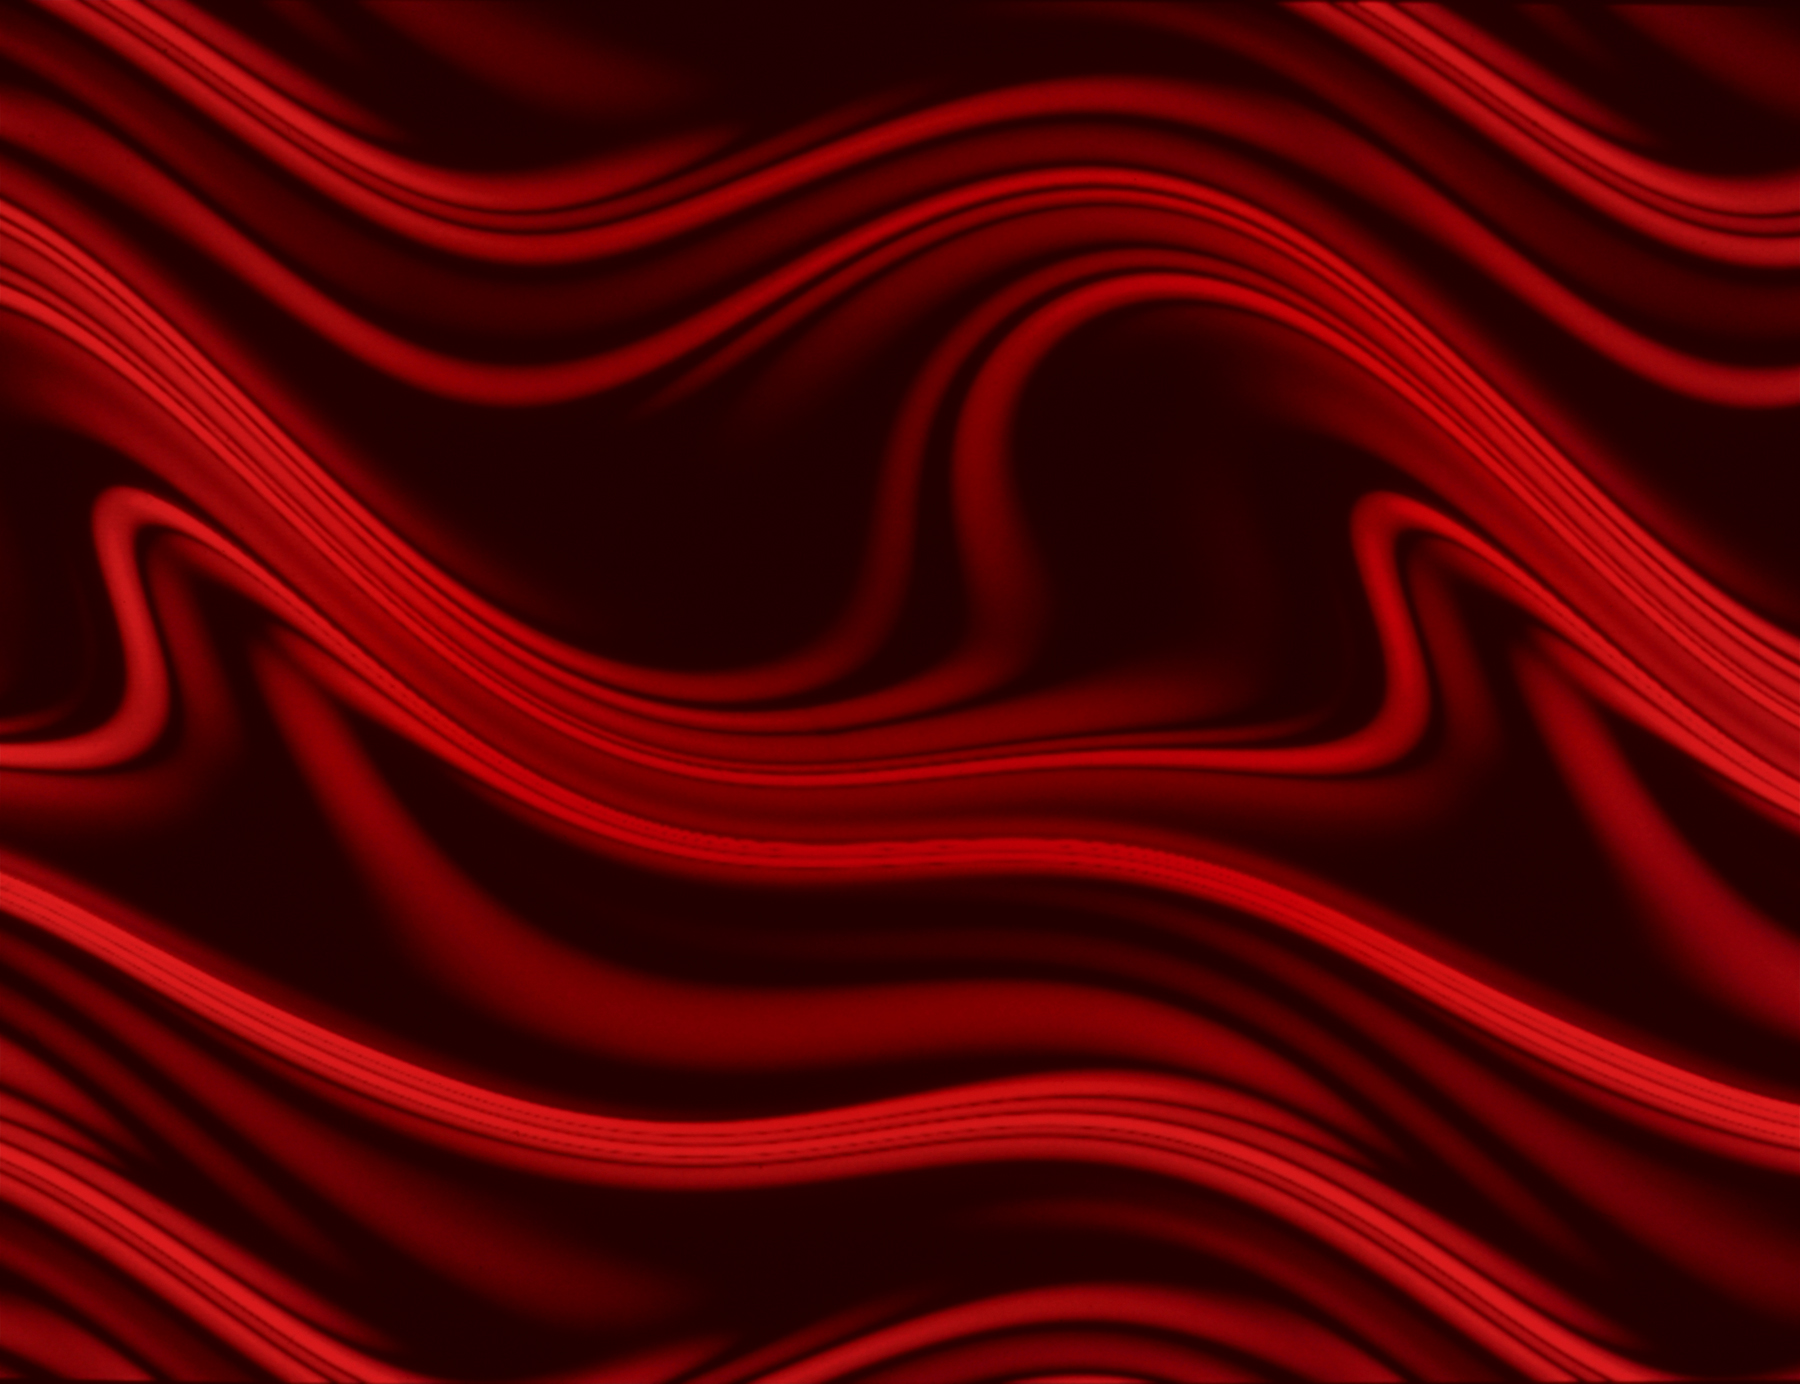 A computer visualization of chaos, which appears as ribbons and swirls of red on a dark background.